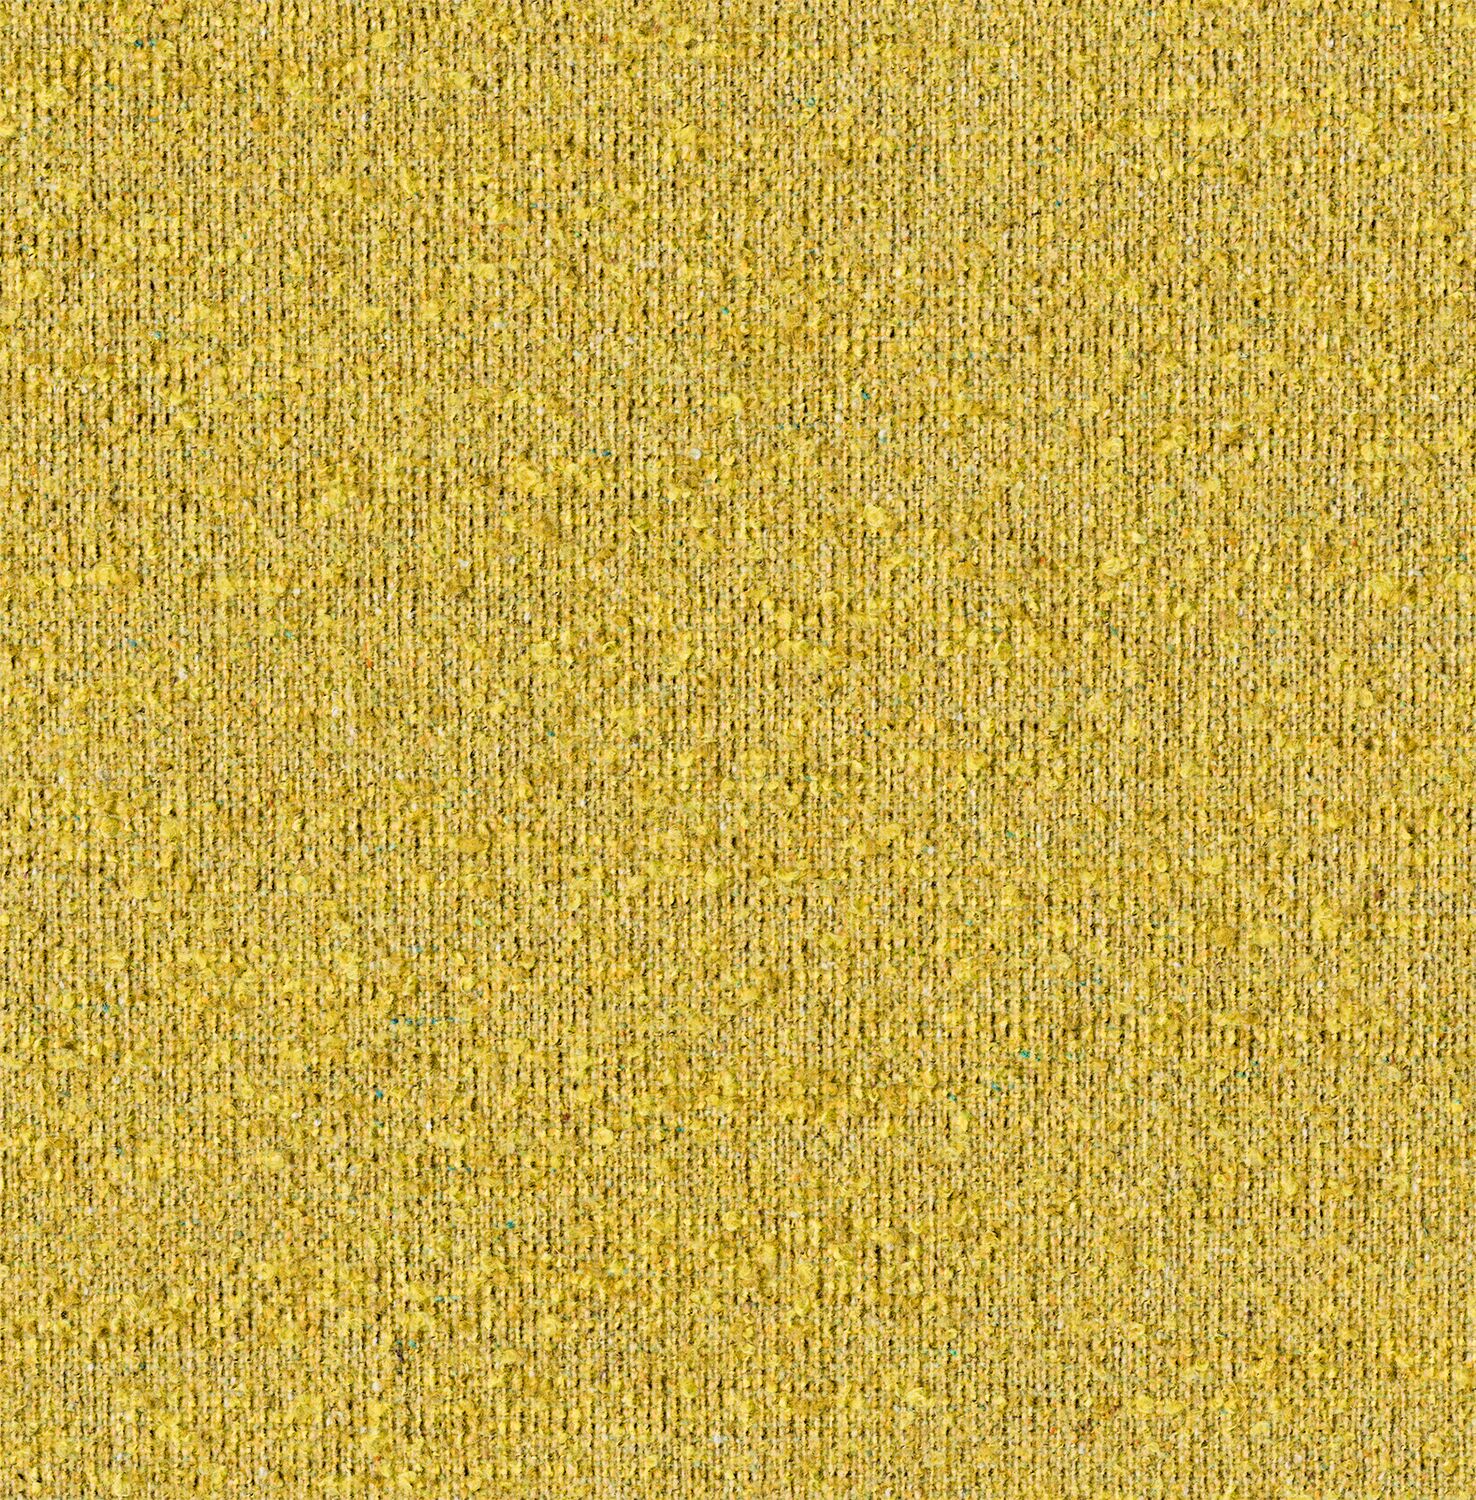 Everyday Boucle - Yarrow - 4111 - 17 Tileable Swatches